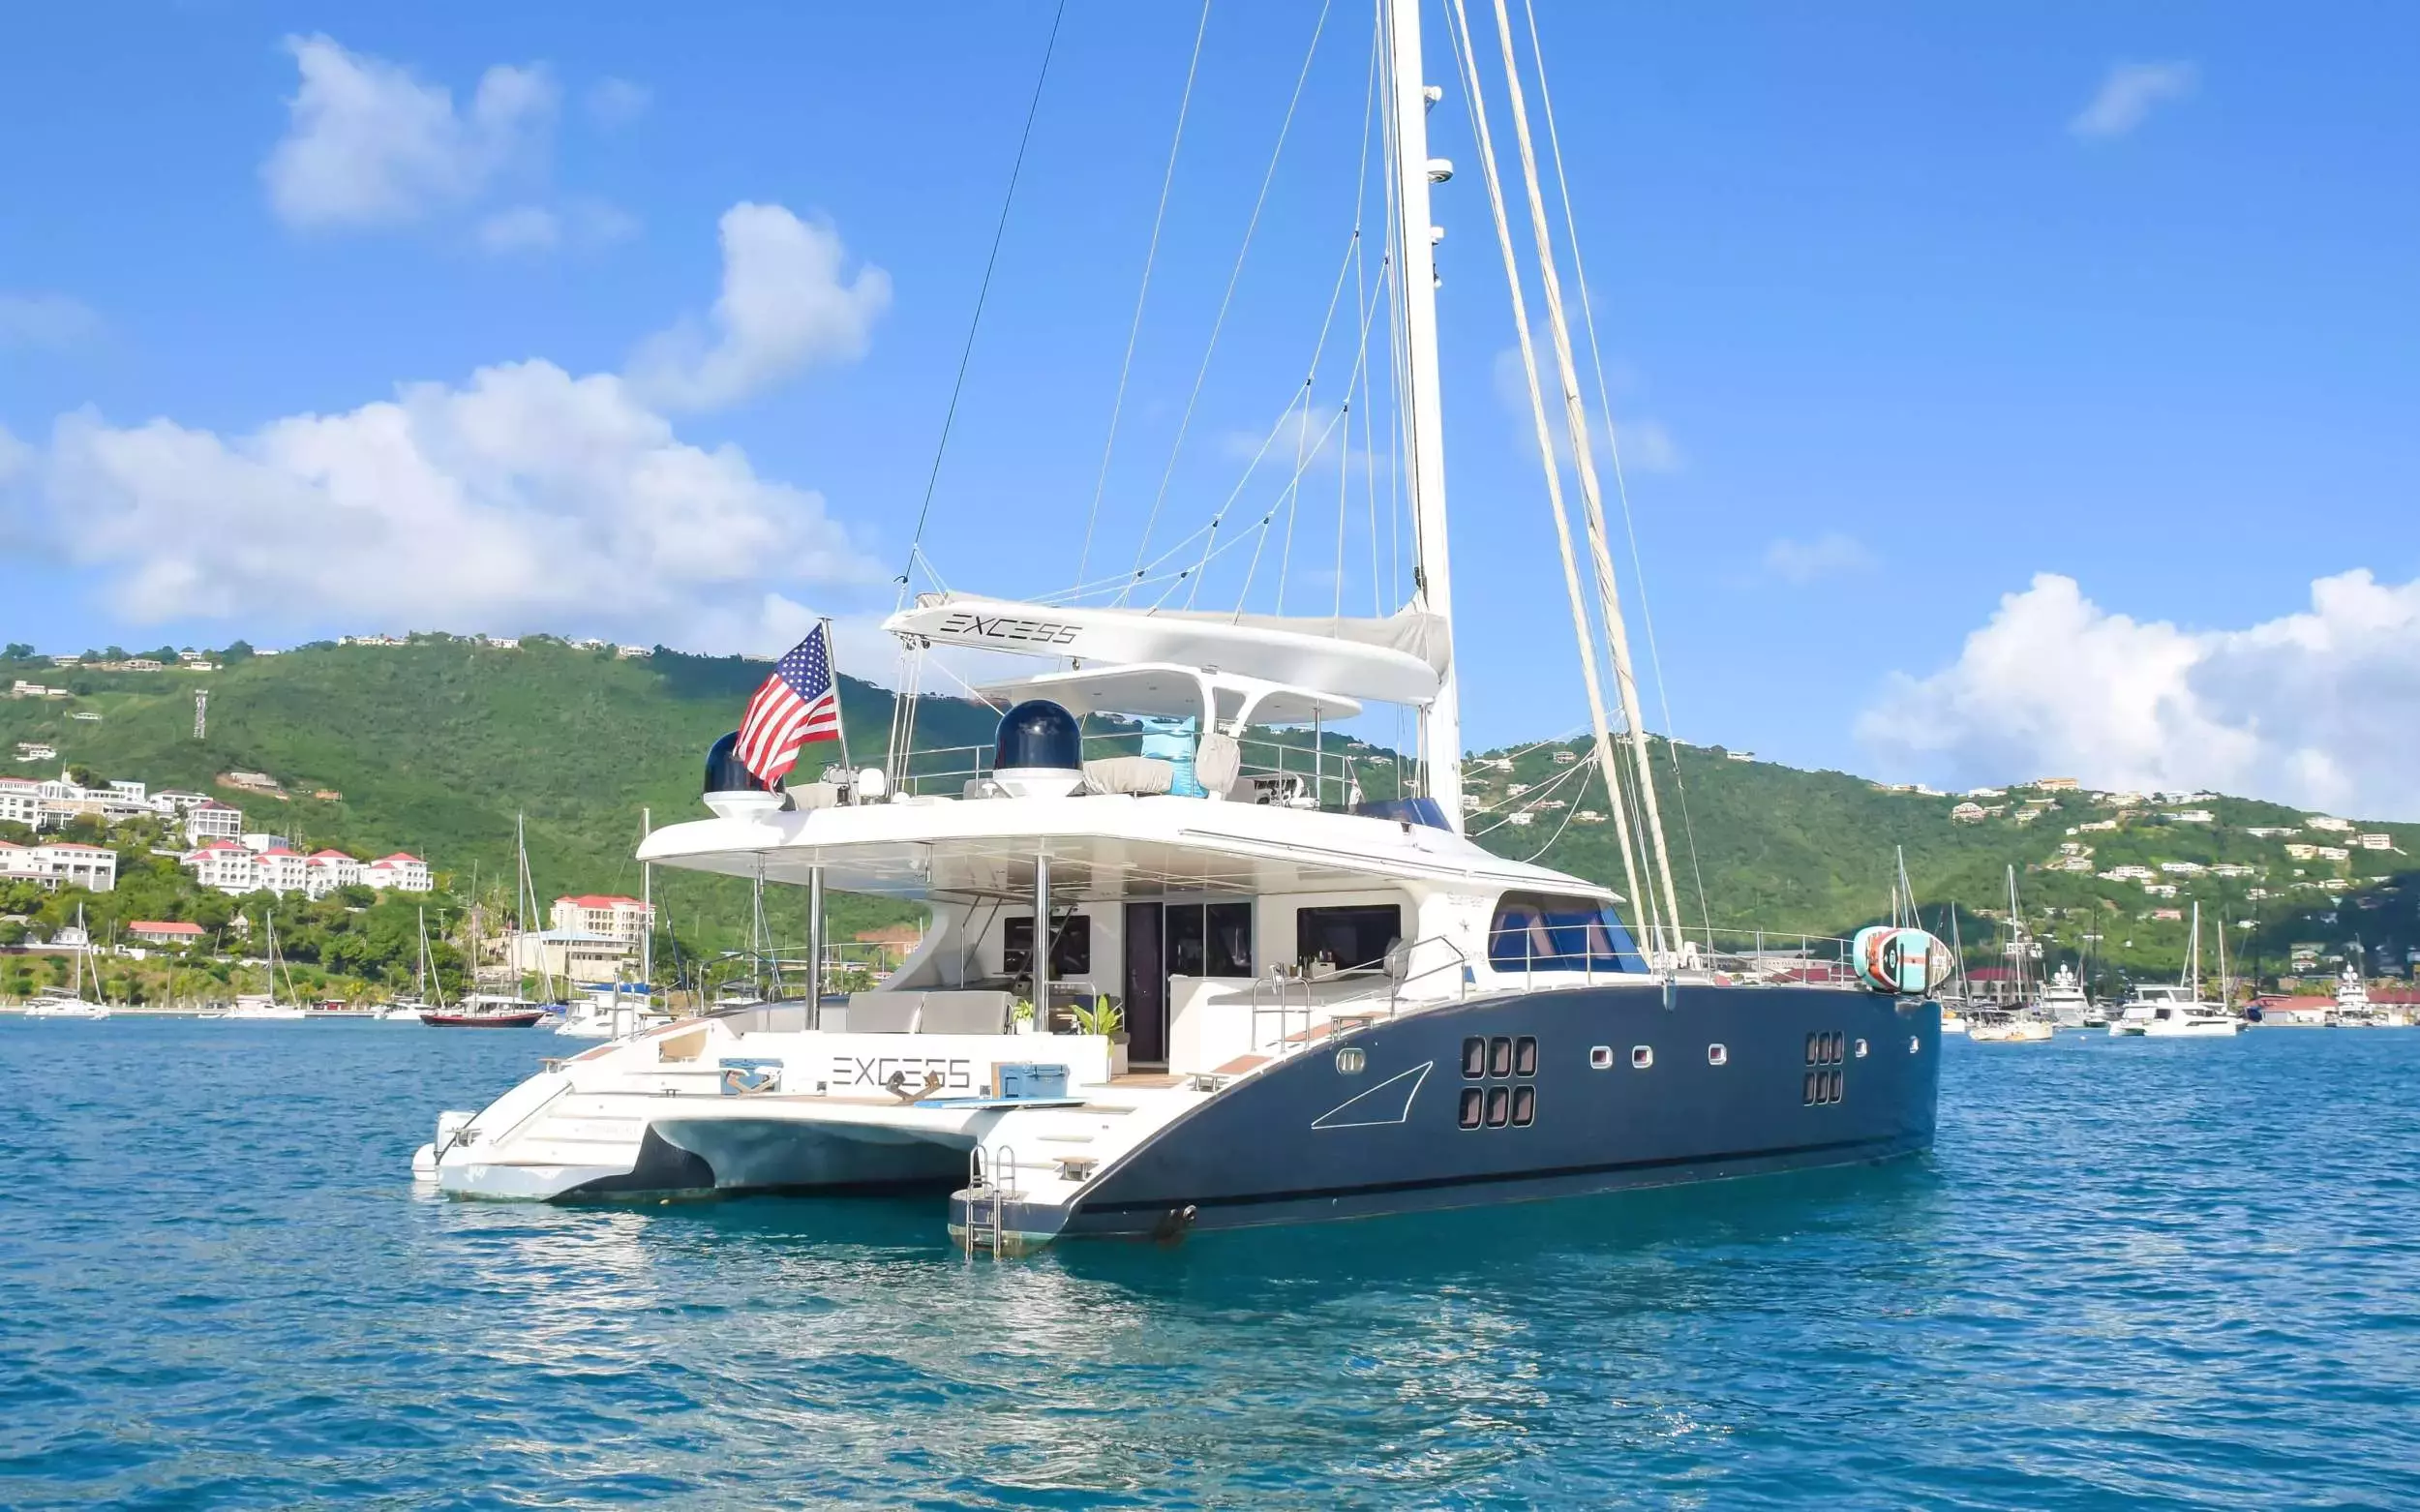 Excess by Sunreef Yachts - Top rates for a Charter of a private Luxury Catamaran in British Virgin Islands